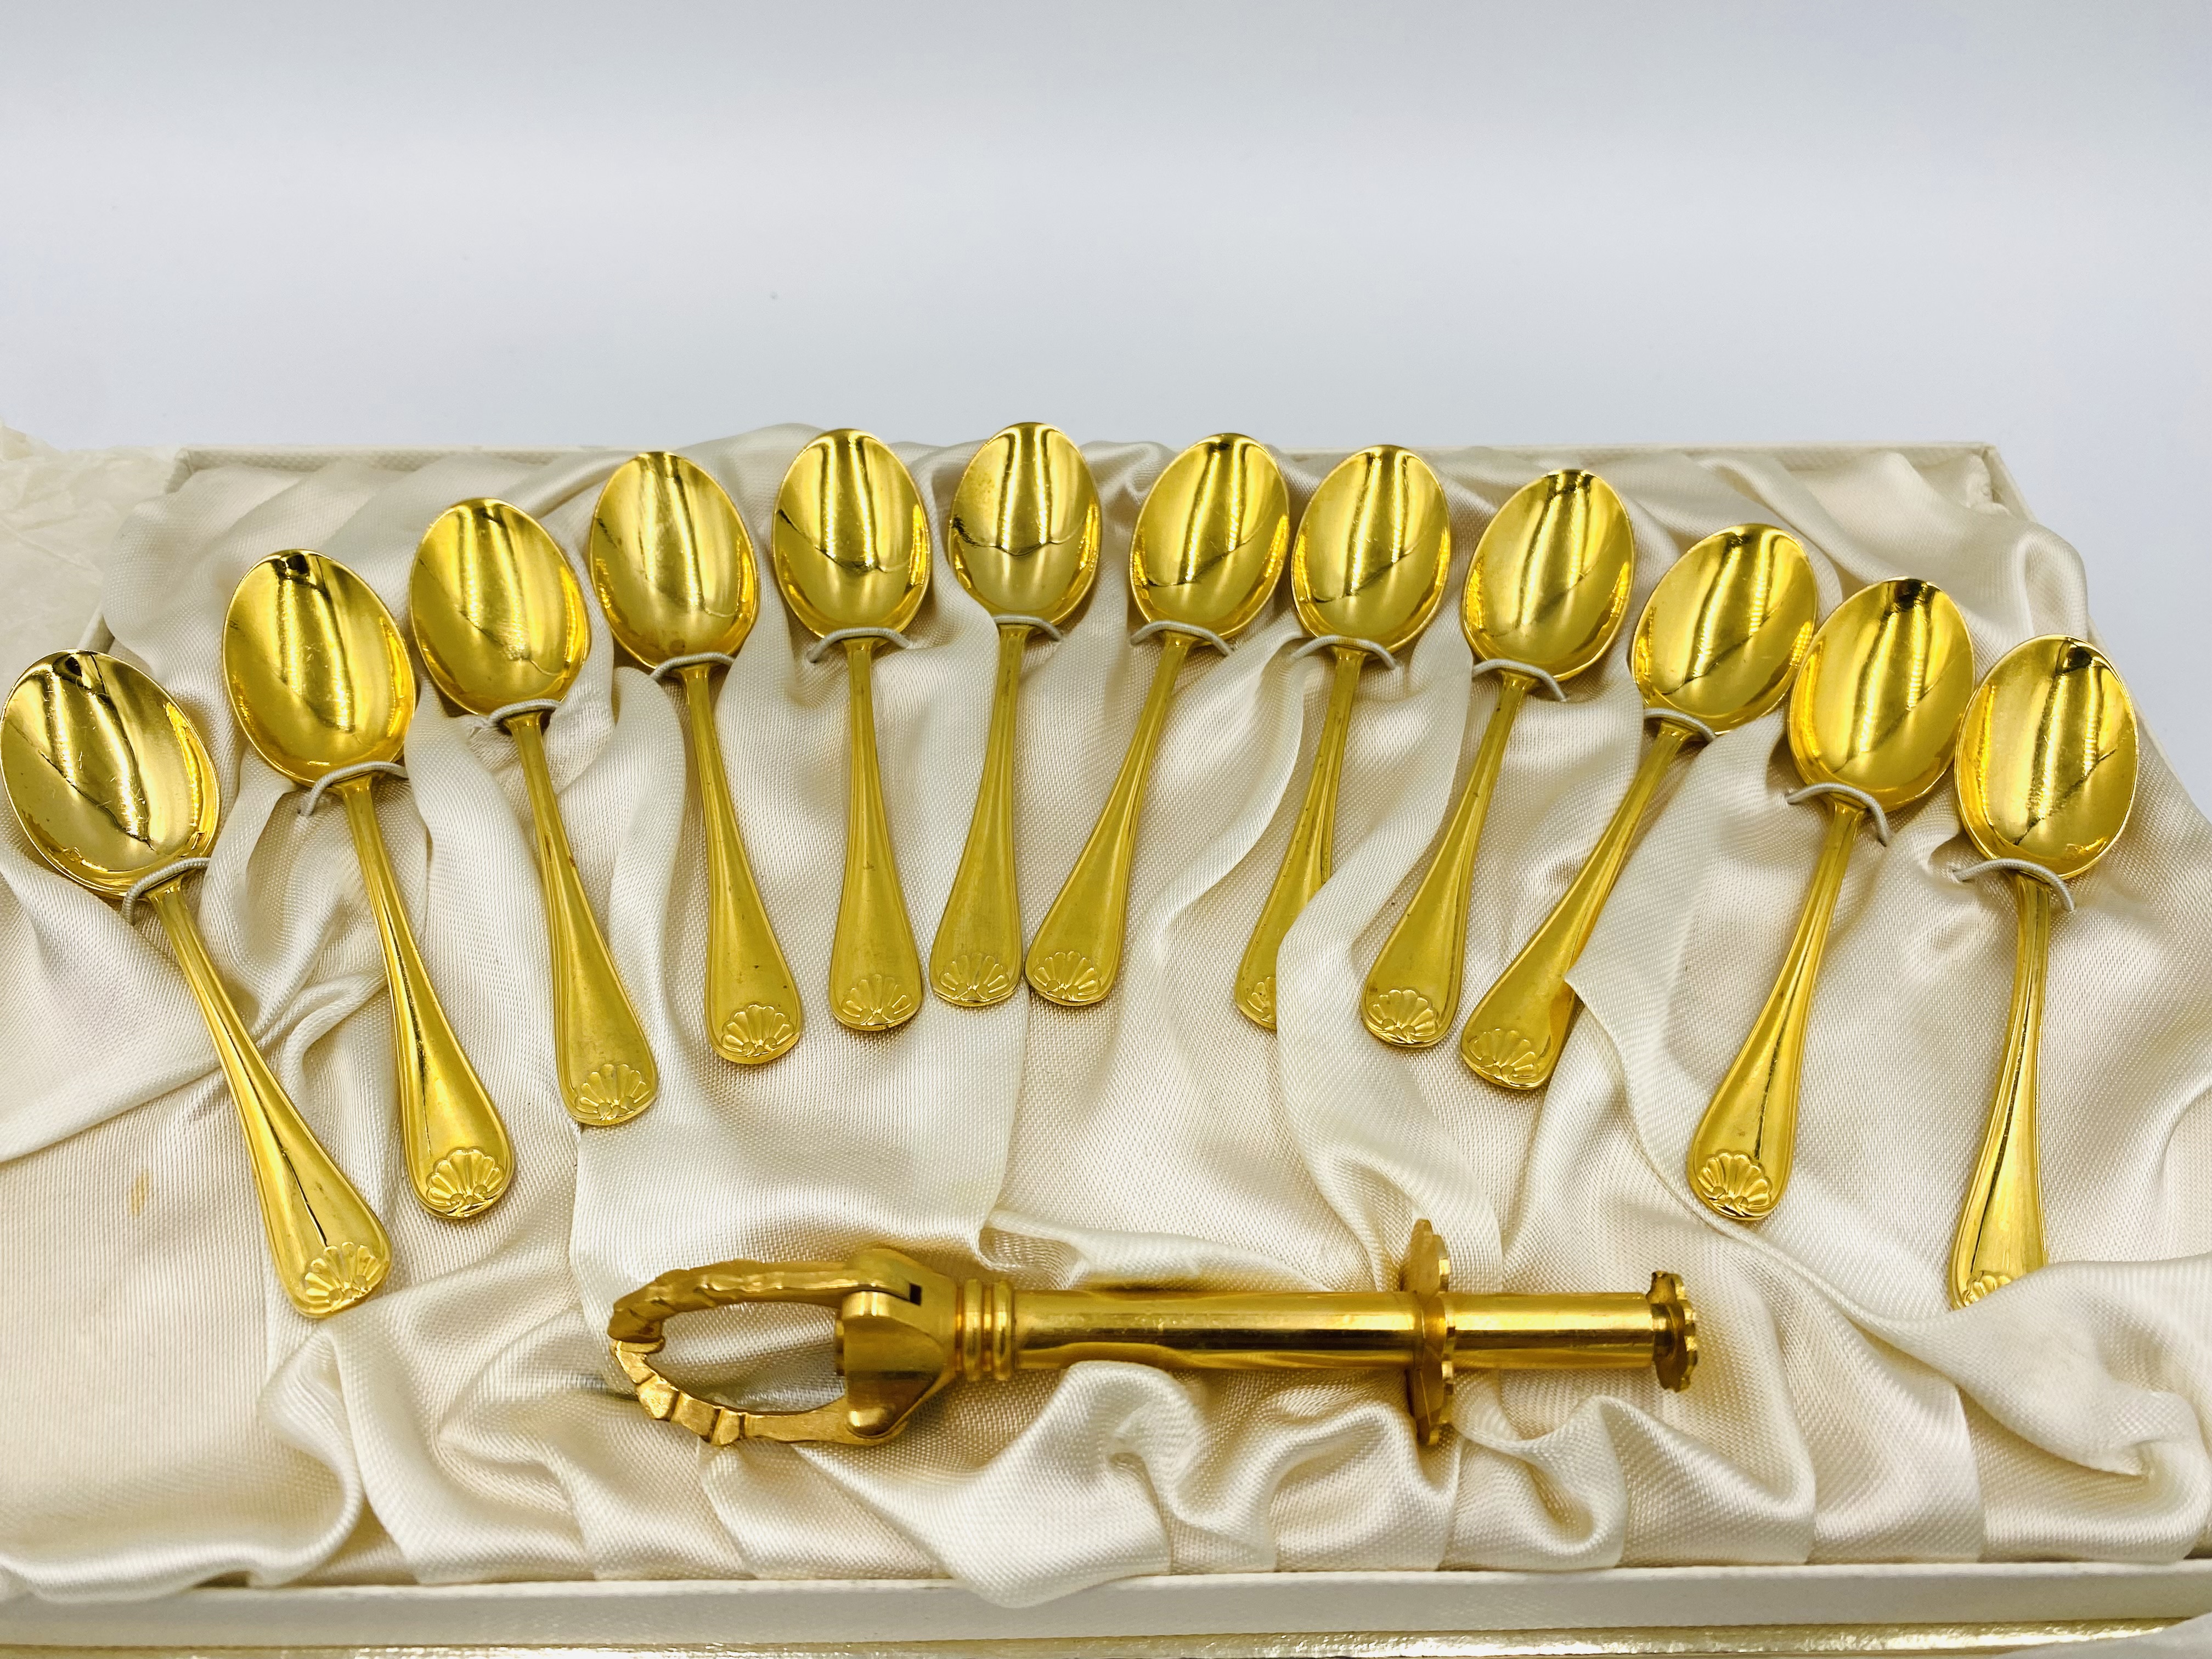 A set of gold plated coffee spoons and other items